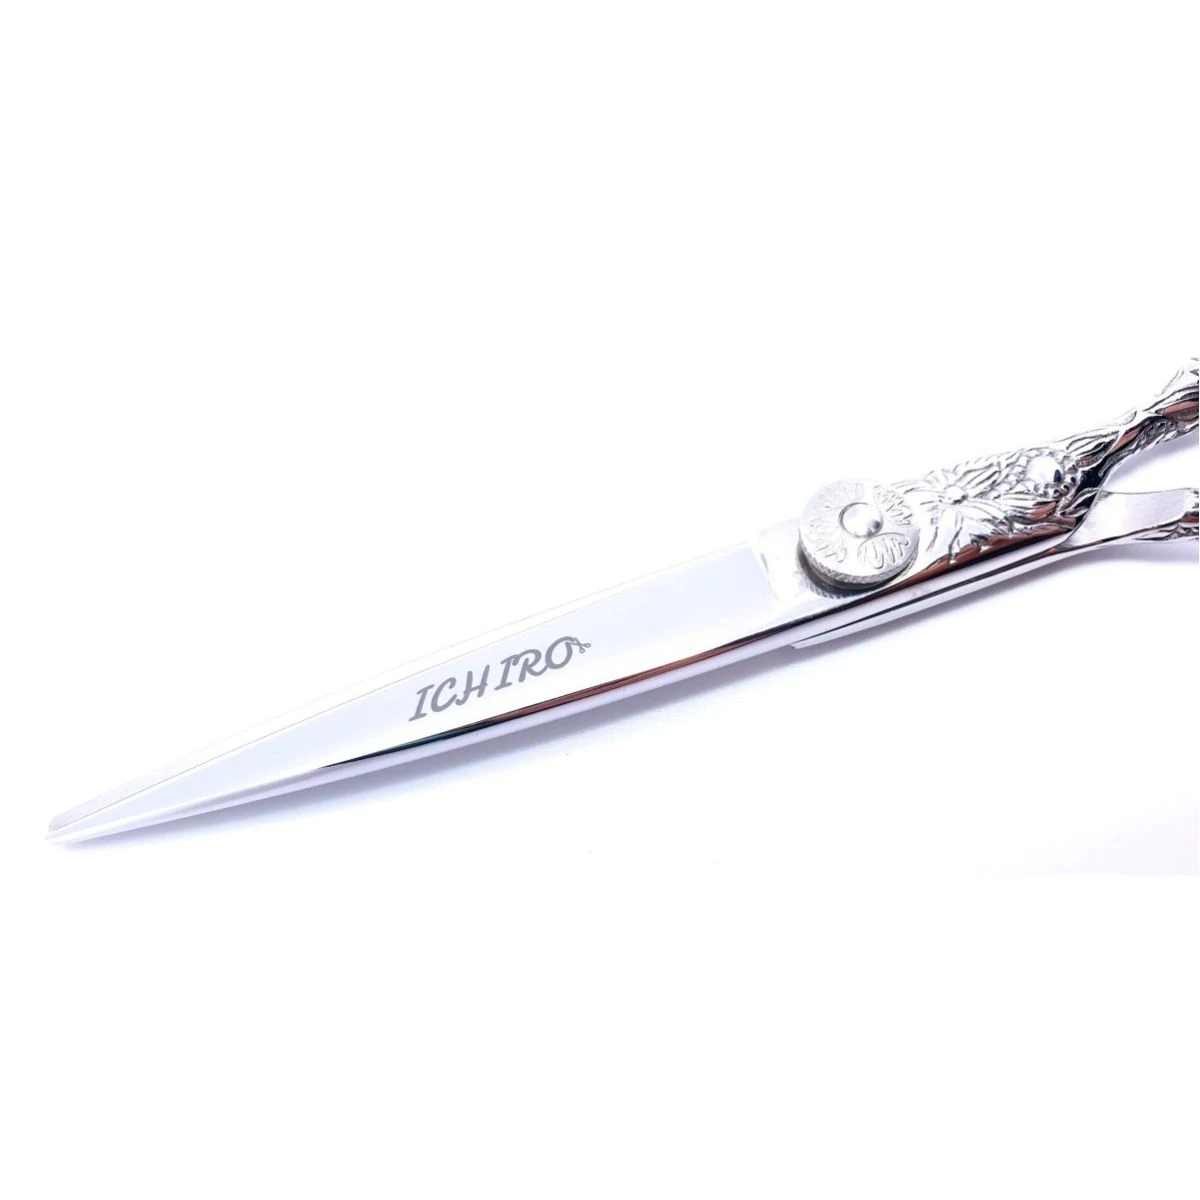 The Japanese 440C hairdressing shear with a handcrafted Sakura pattern on the body and handle